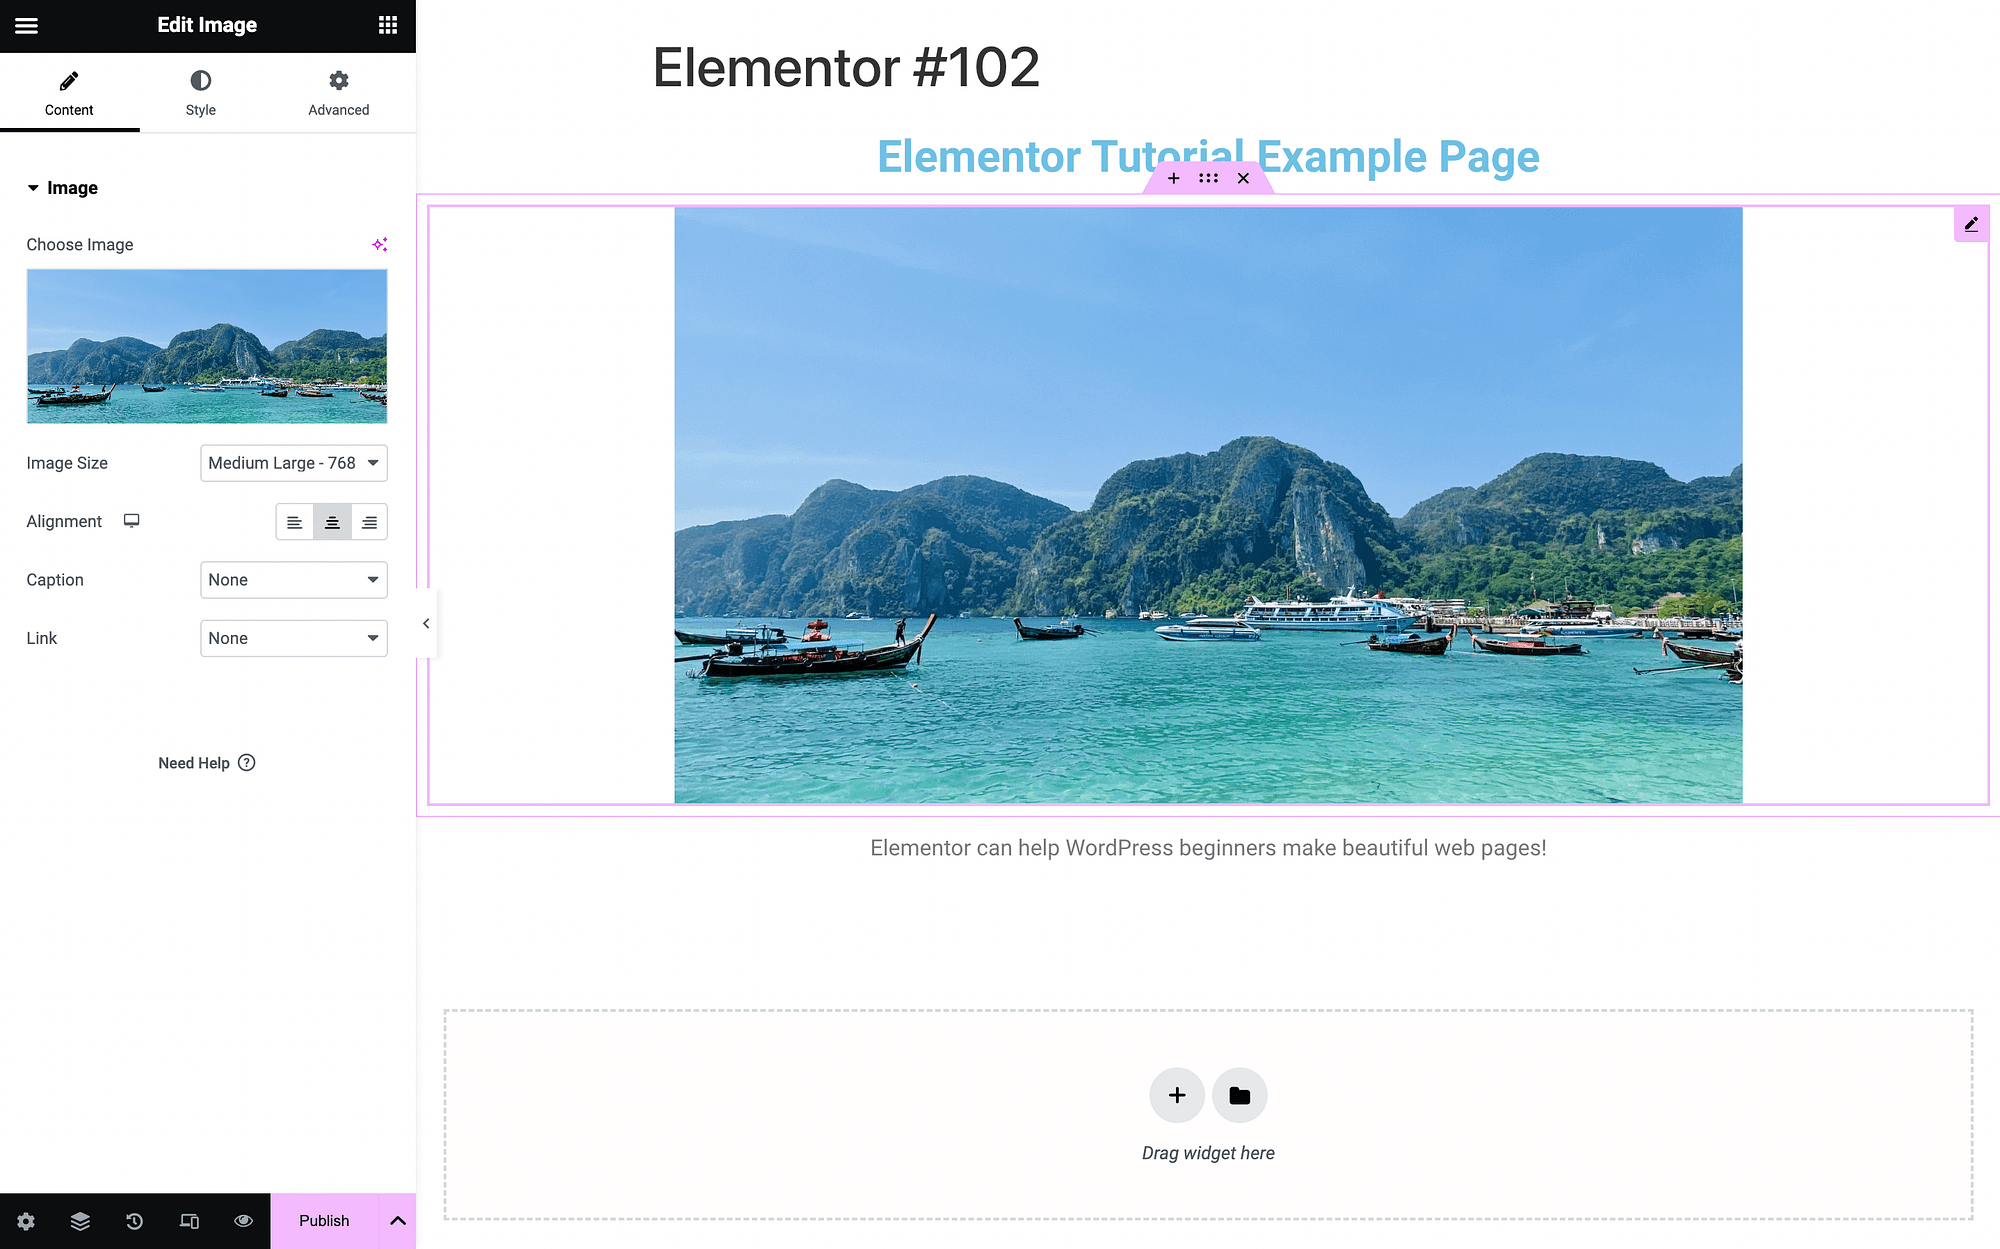 Elementor tutorial on choosing an image for your image widget.